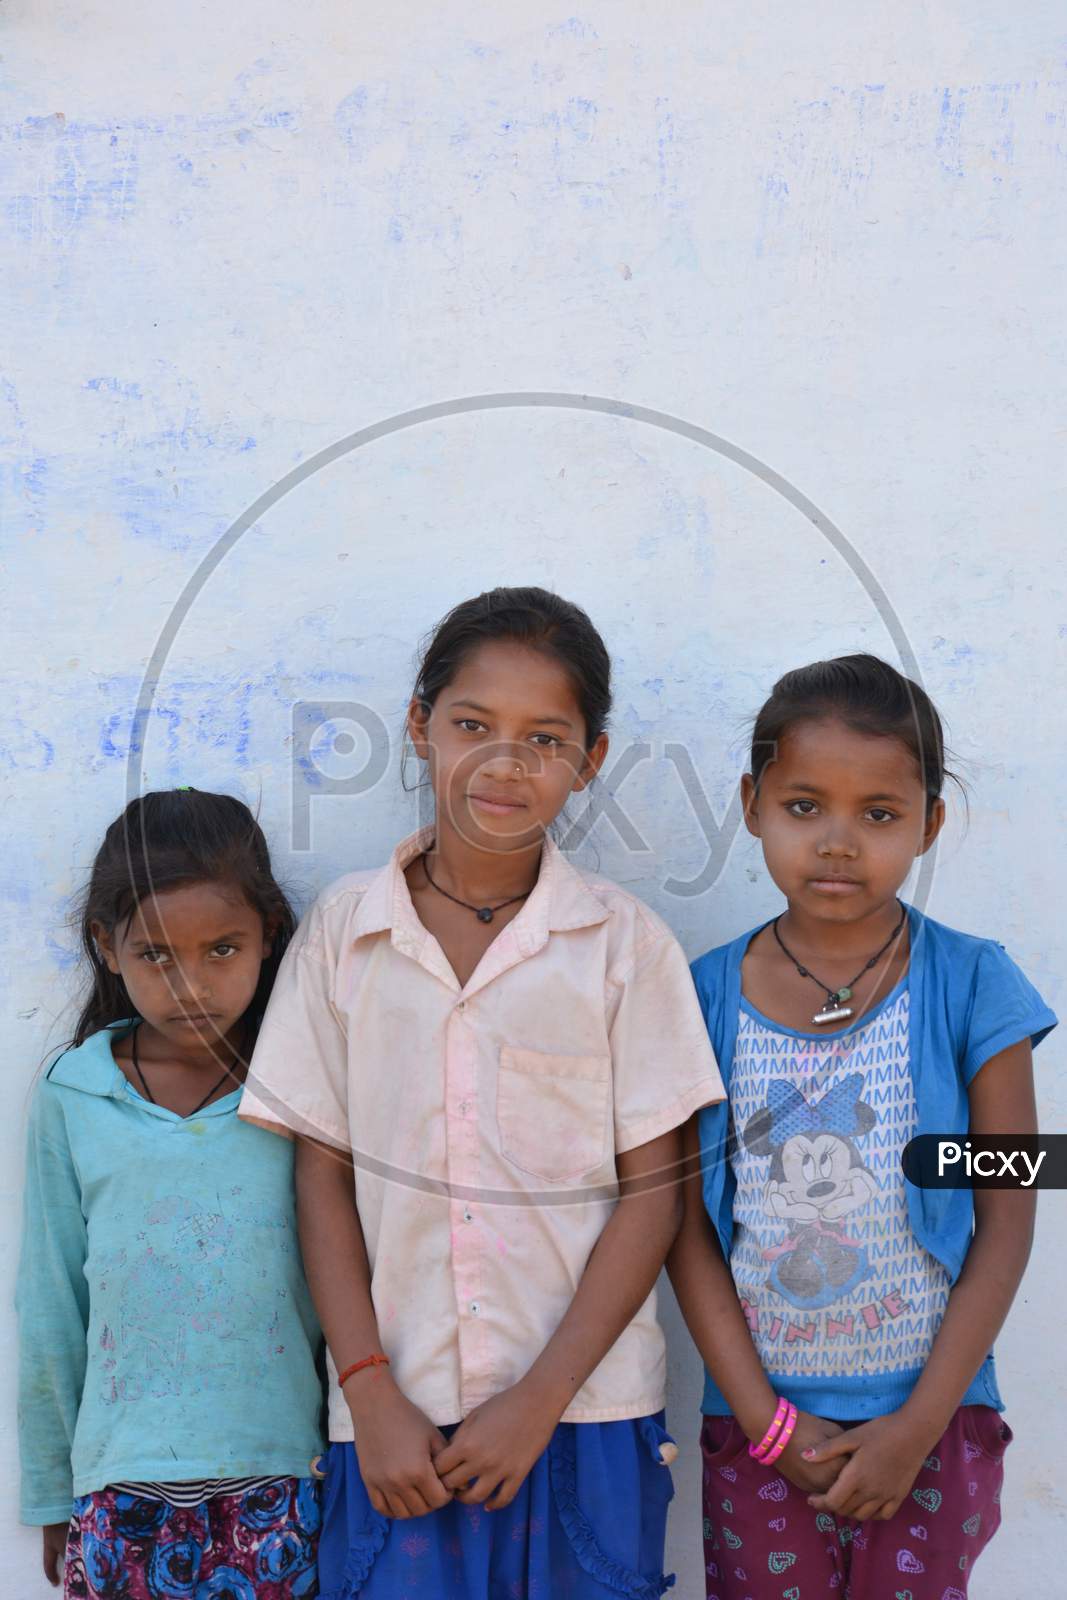 TIKAMGARH, MADHYA PRADESH, INDIA - MARCH 24, 2020: Group of happy Indian little village girls standing in front of their house.